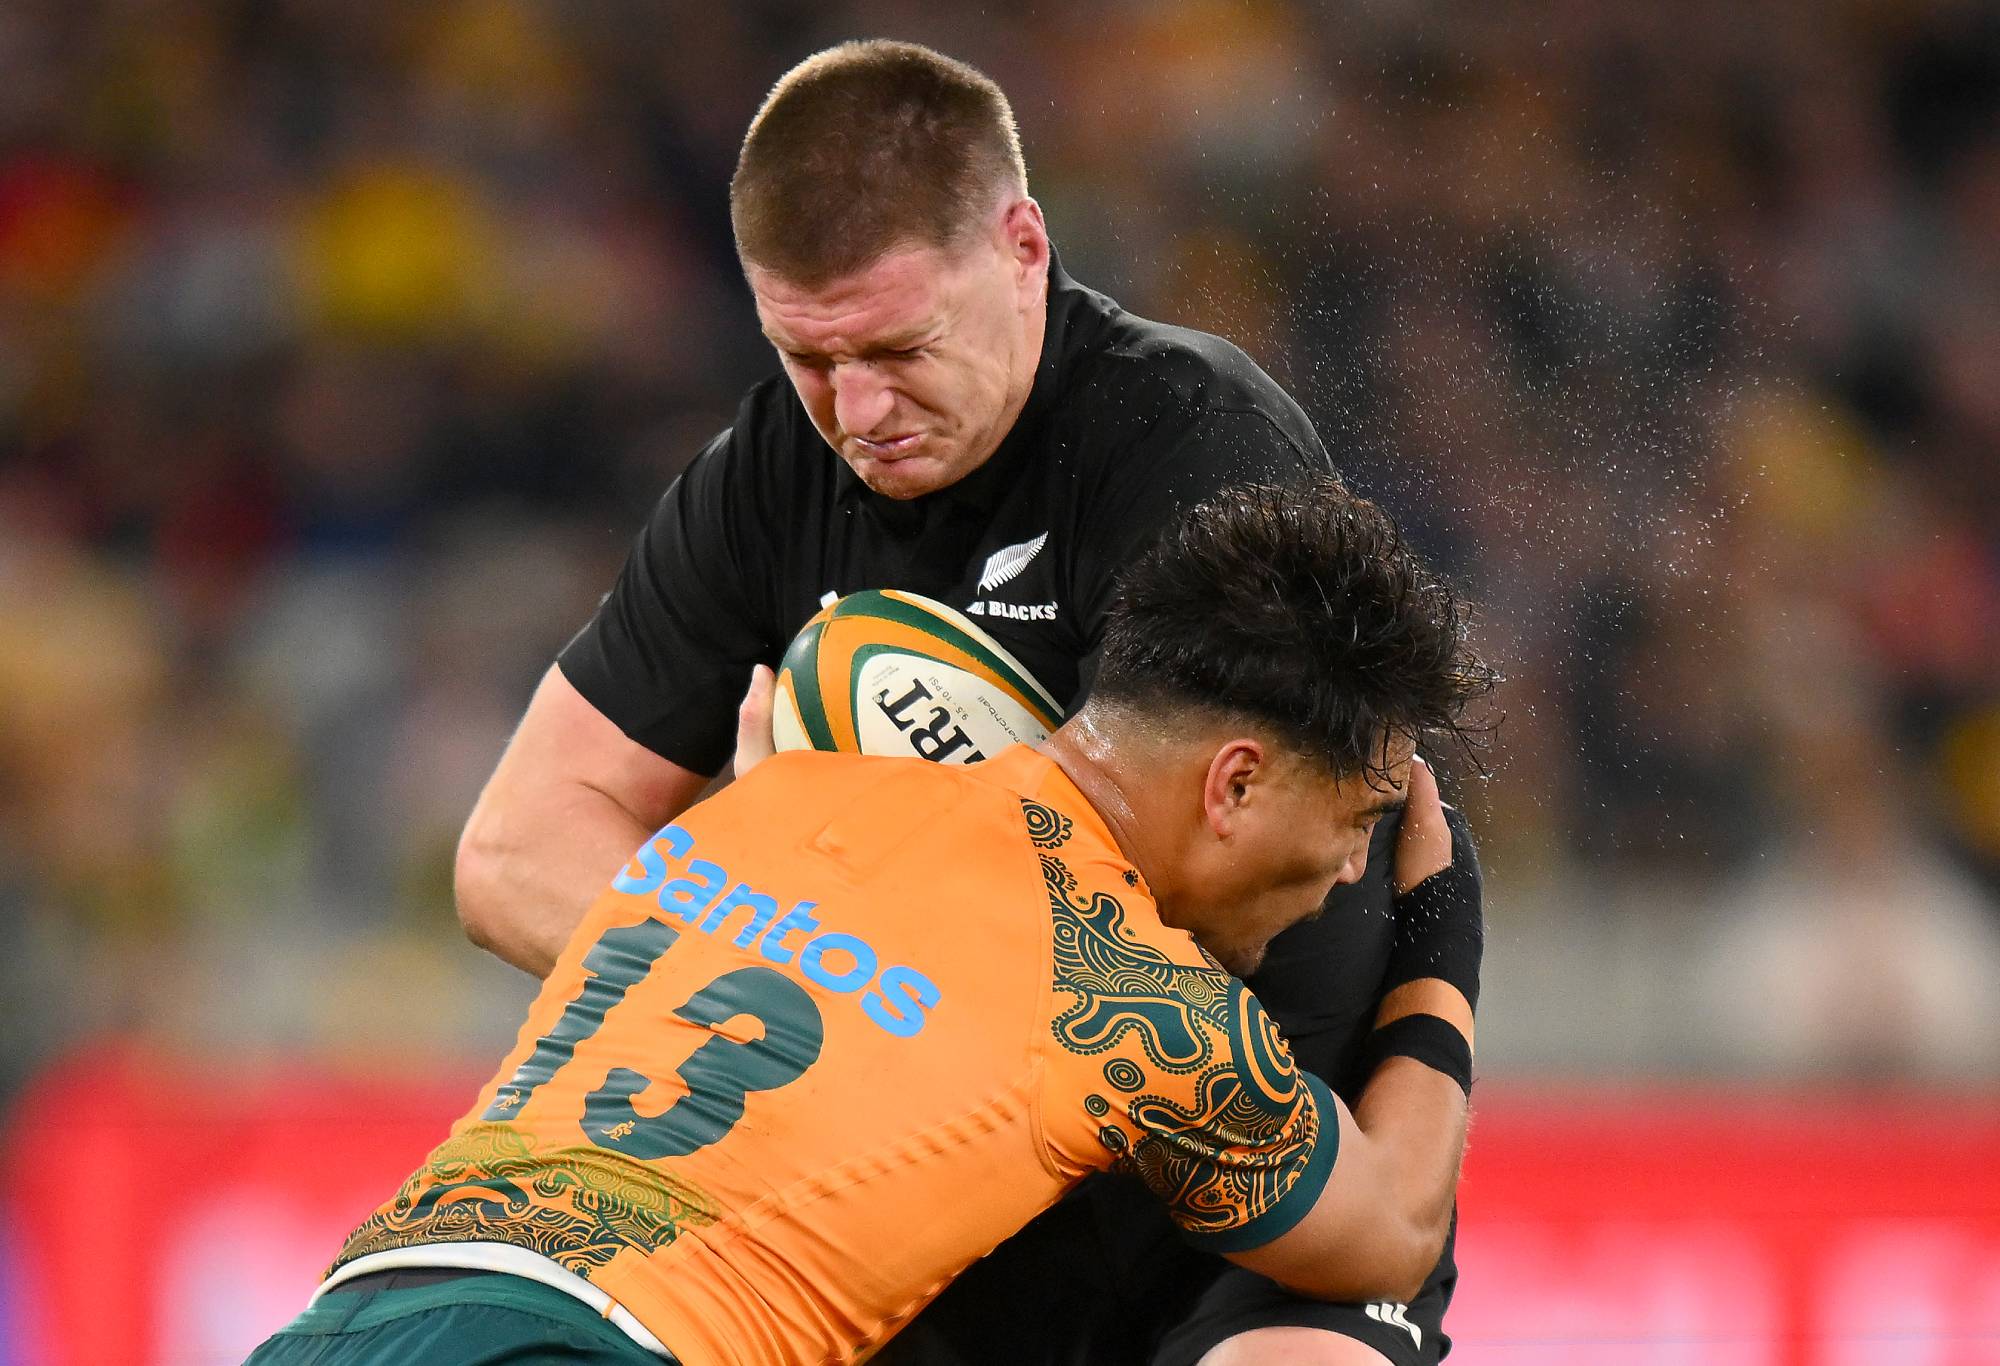 Jordan Petaia of the Wallabies tackles Jordie Barrett of the All Blacks during the The Rugby Championship & Bledisloe Cup match between the Australia Wallabies and the New Zealand All Blacks at Melbourne Cricket Ground on July 29, 2023 in Melbourne, Australia. (Photo by Morgan Hancock/Getty Images)